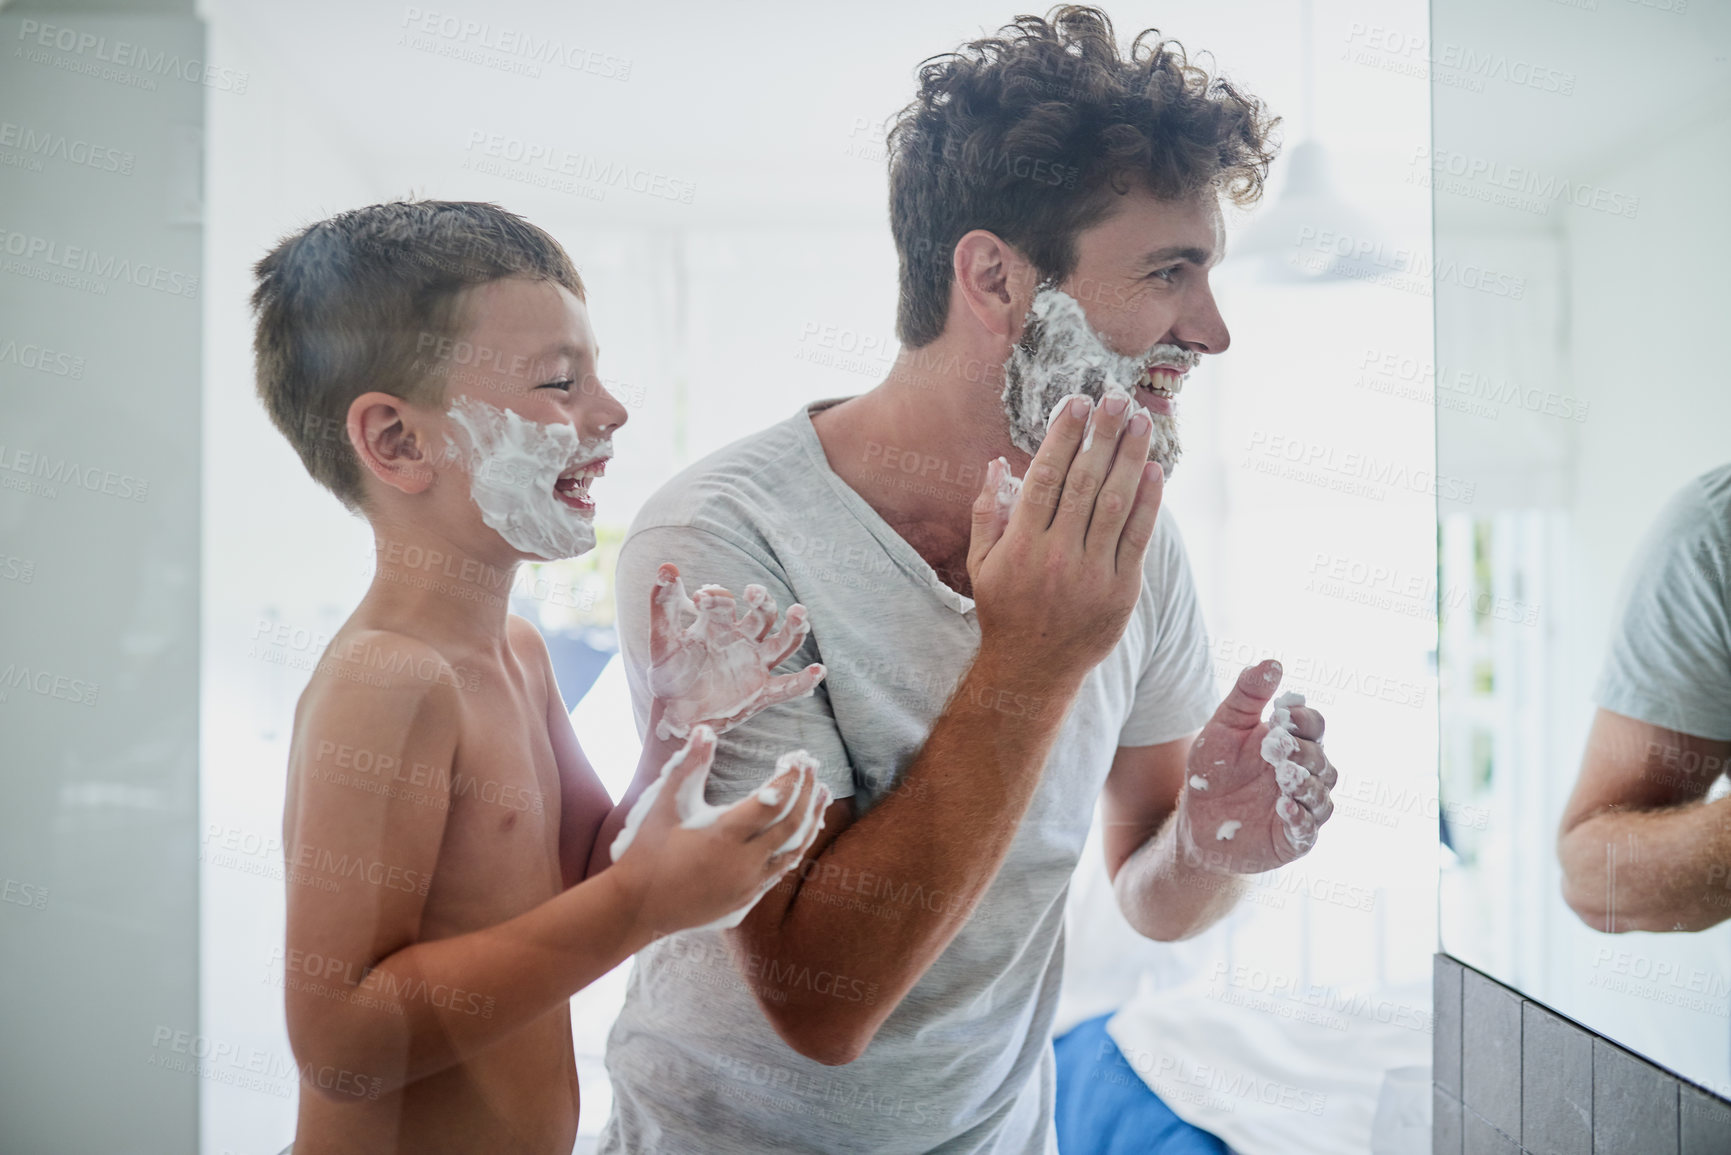 Buy stock photo Kid, father and learning to shave, laughing and bonding together in bathroom. Funny, dad and teaching child with shaving cream on face beard, playing or cleaning, hygiene or enjoying hair removal.